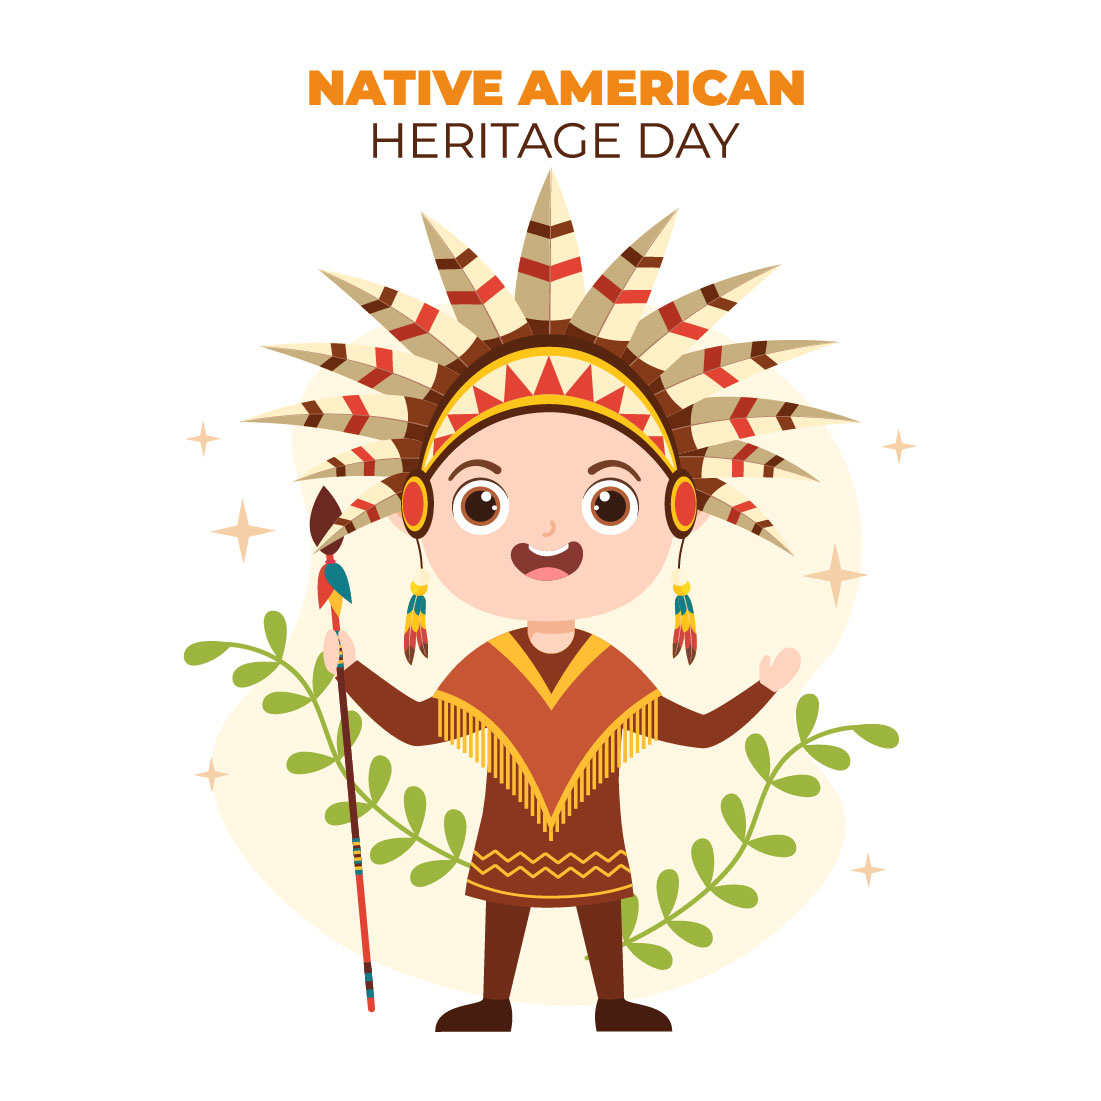 11 Native American Heritage Day Illustration Preview Image.